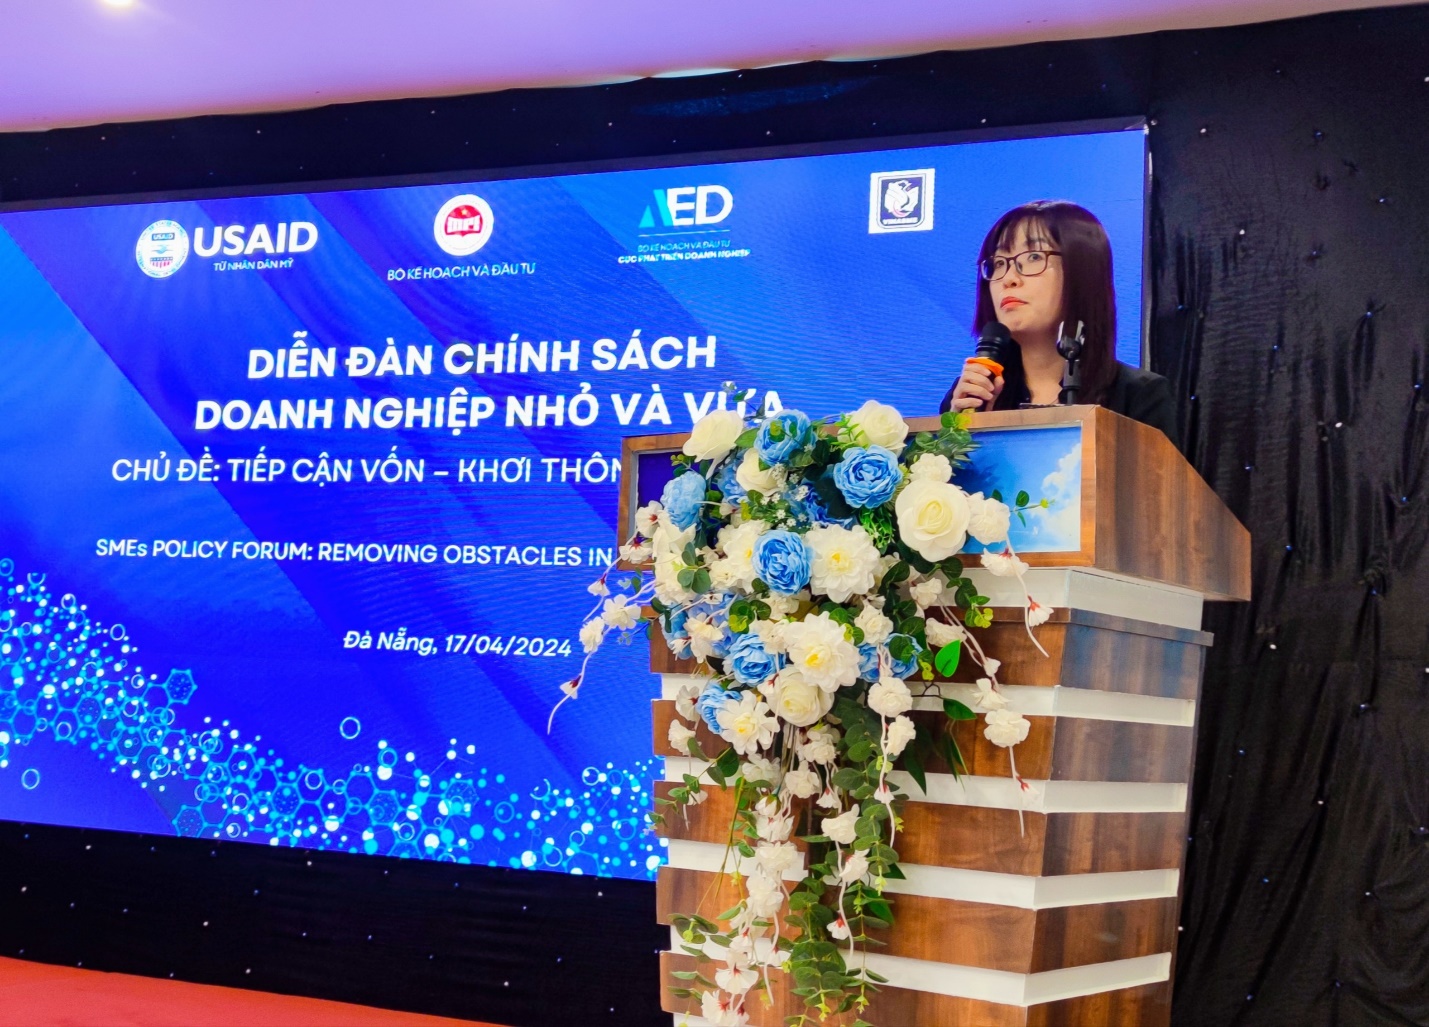 Representative of the United States Agency for International Development (USAID), Ms Nguyen Khanh Cam Chau - Team Leader for Economic Growth, Office of Governance and Economic Growth, speaking at the forum